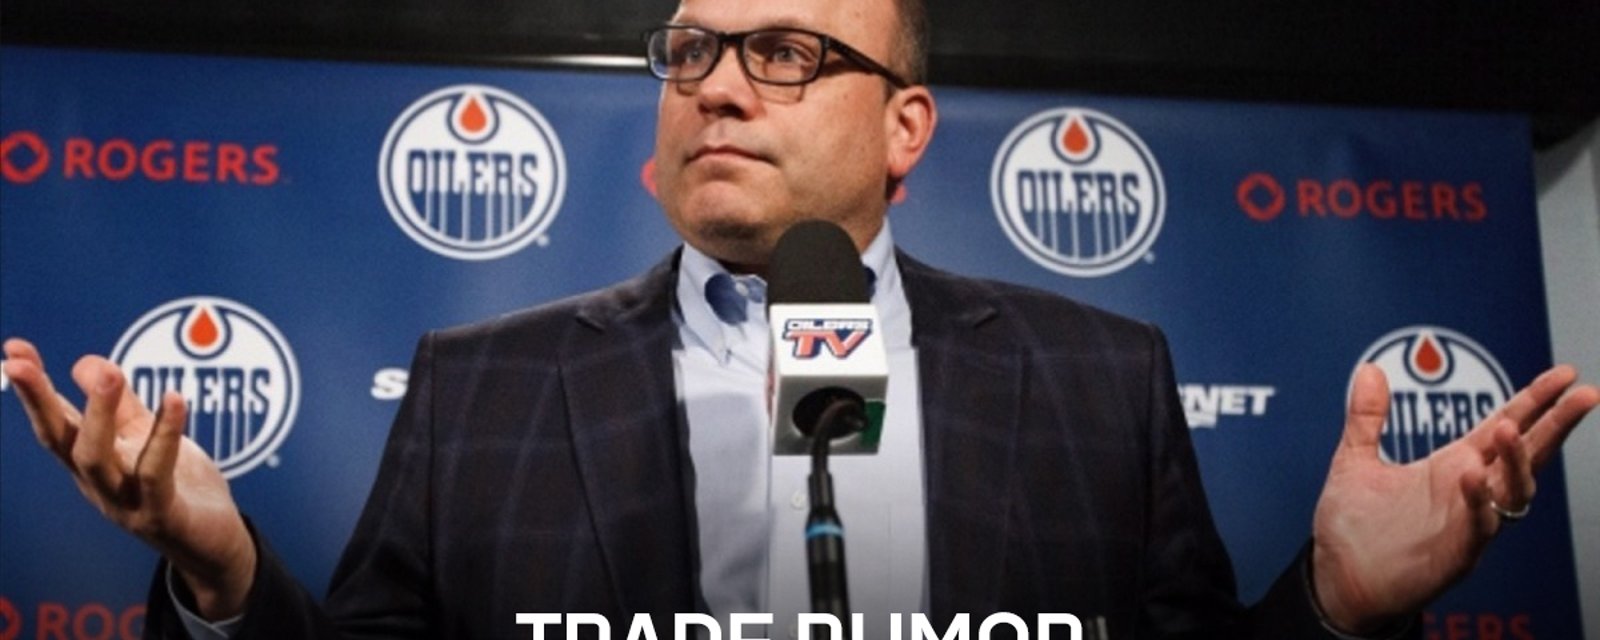 Breaking: Oilers trying to make a trade, several teams showing serious interest.